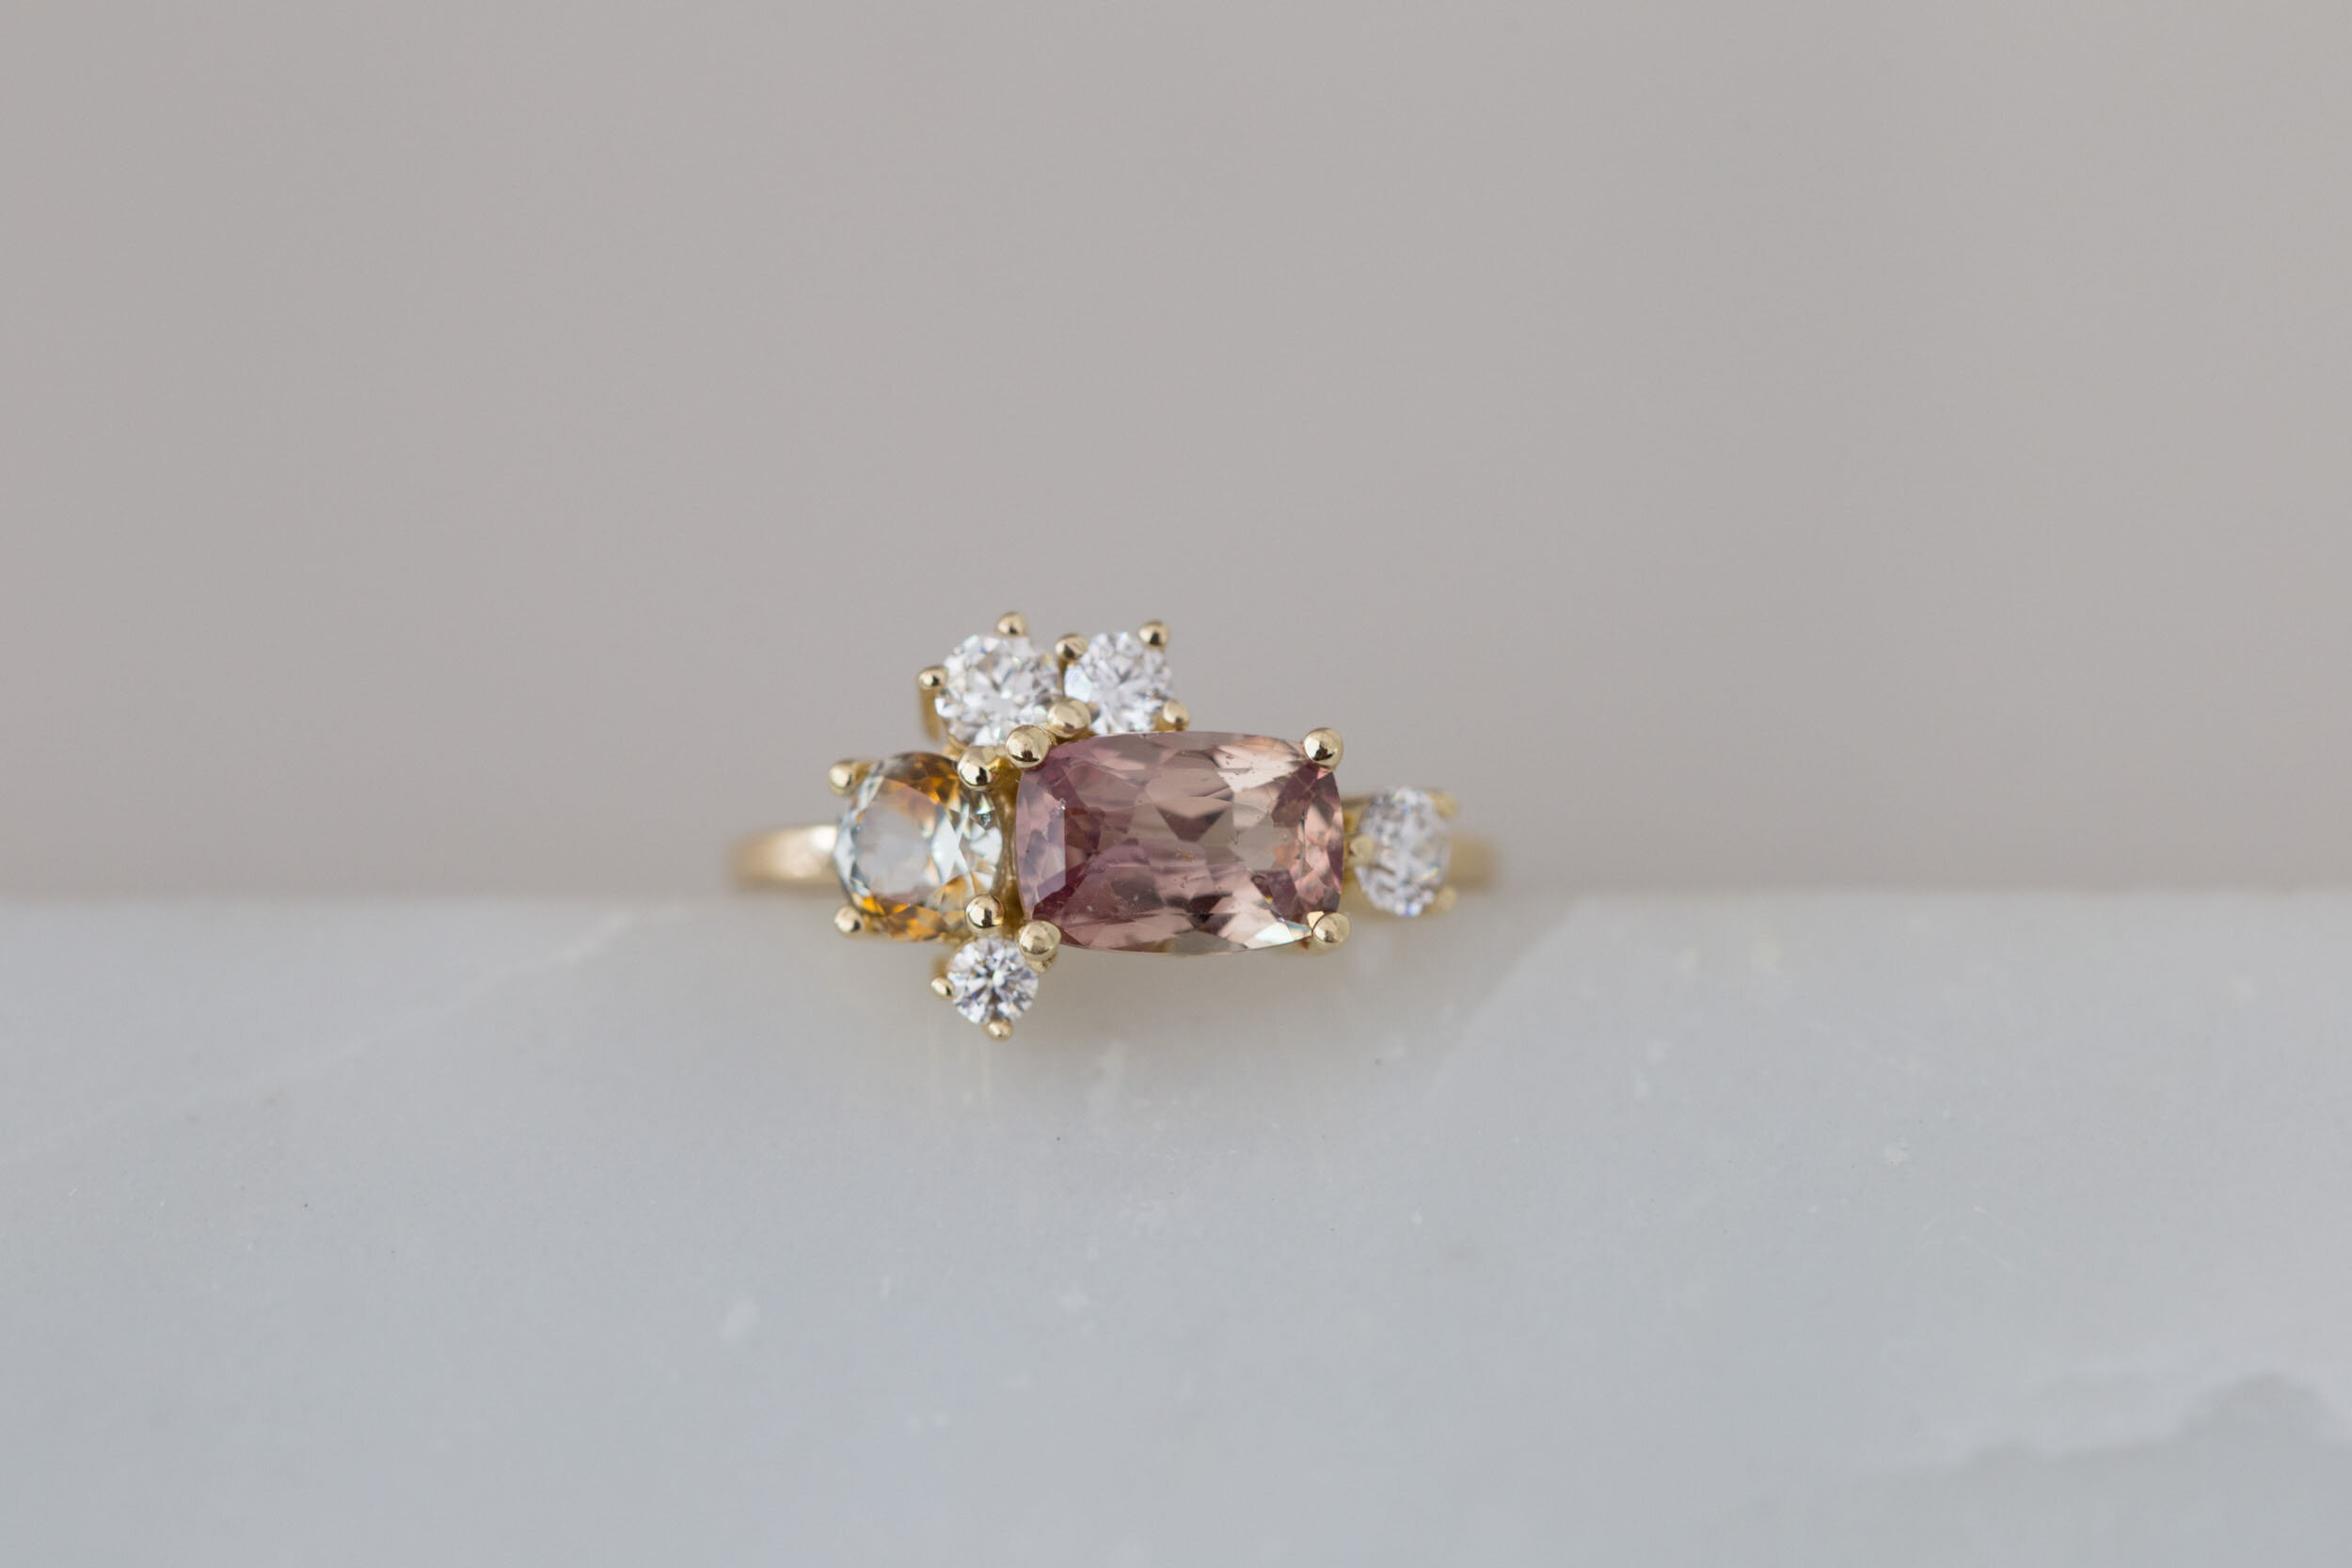 Champagne Sapphire Bicolor Sapphire Diamond Cluster Engagement Ring 14k Yellow Gold One Of A Kind Mineralogy